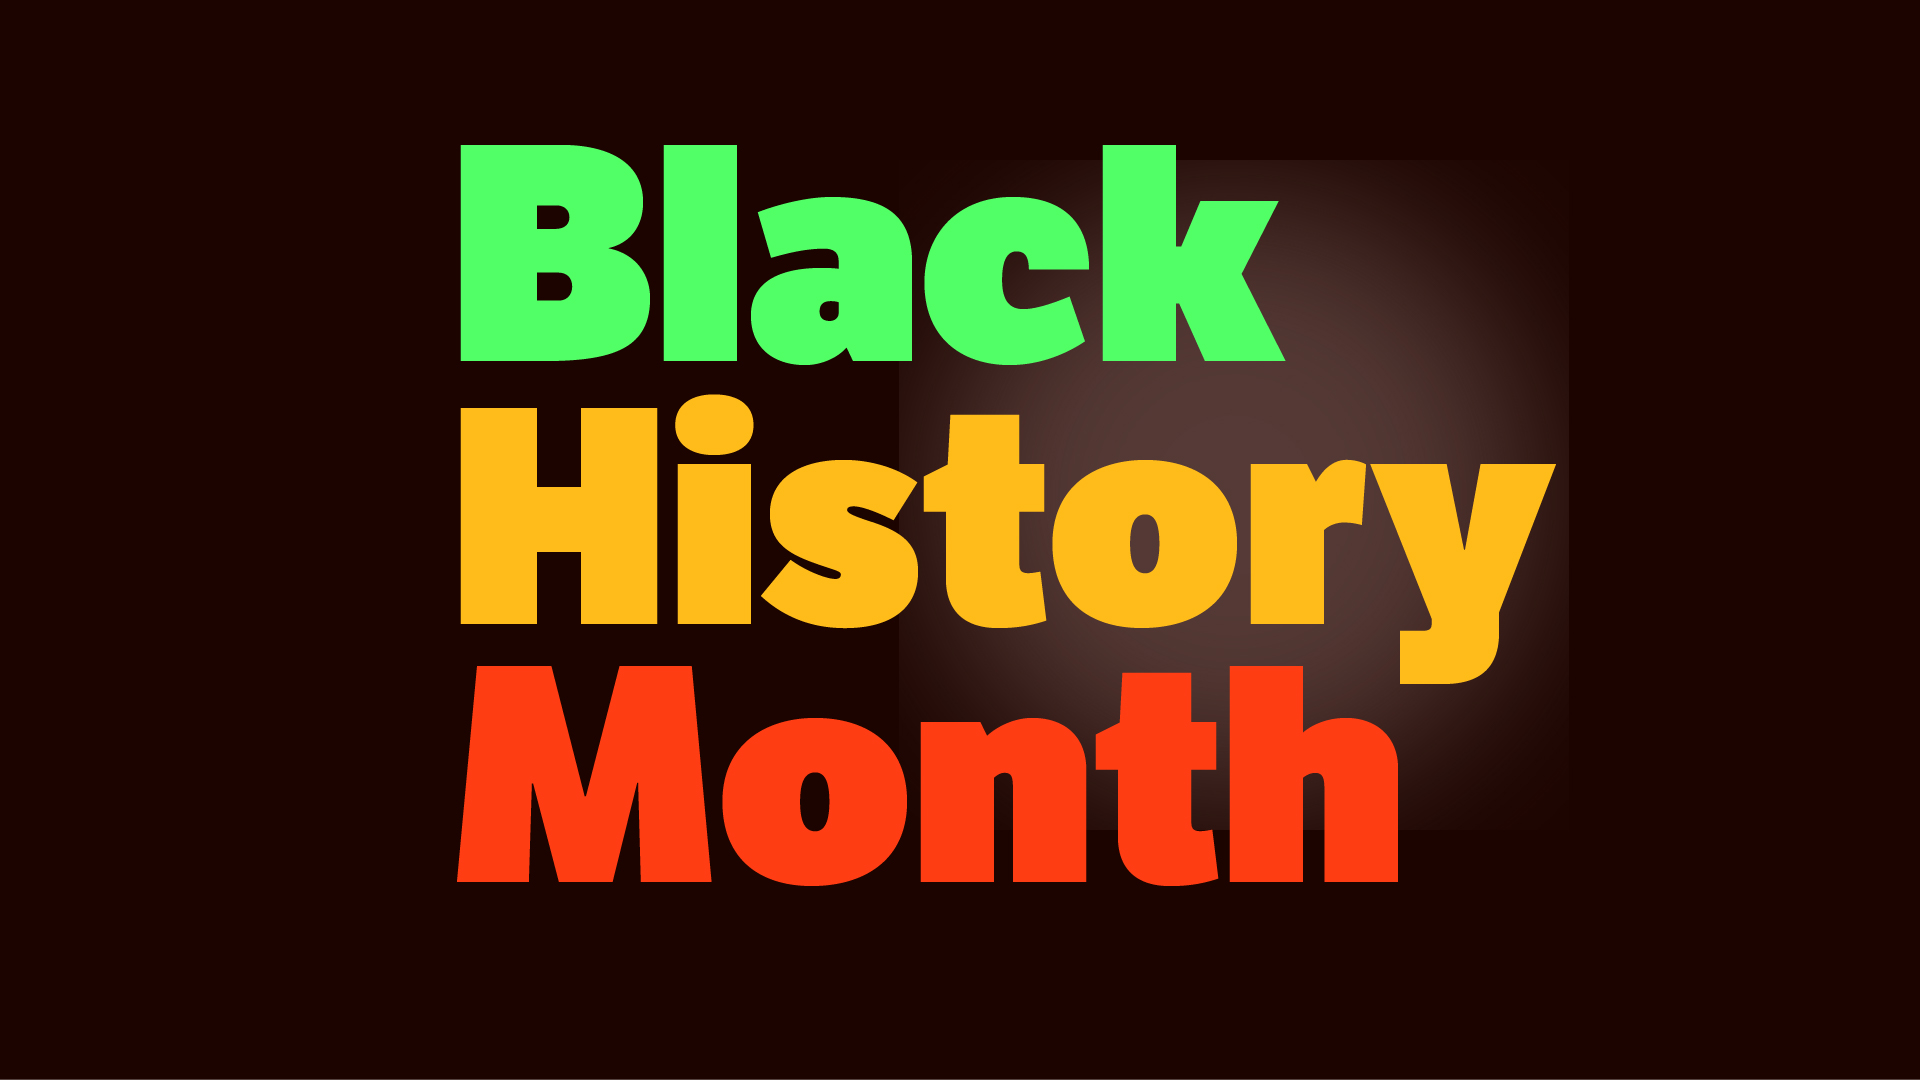 Do You Know The Origin Of Black History Month?